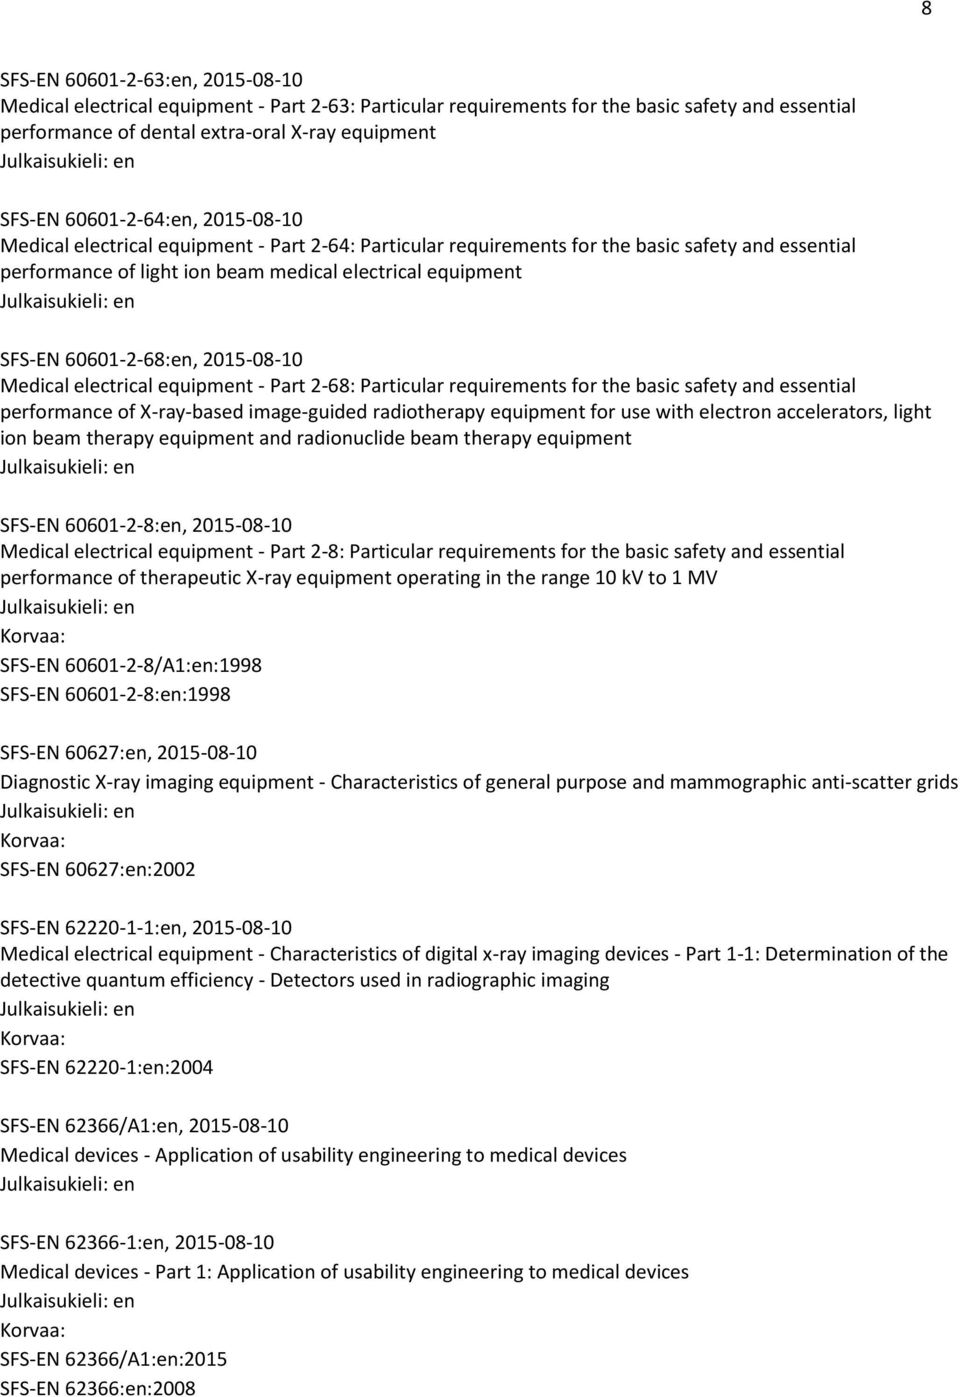 60601-2-68:en, 2015-08-10 Medical electrical equipment - Part 2-68: Particular requirements for the basic safety and essential performance of X-ray-based image-guided radiotherapy equipment for use